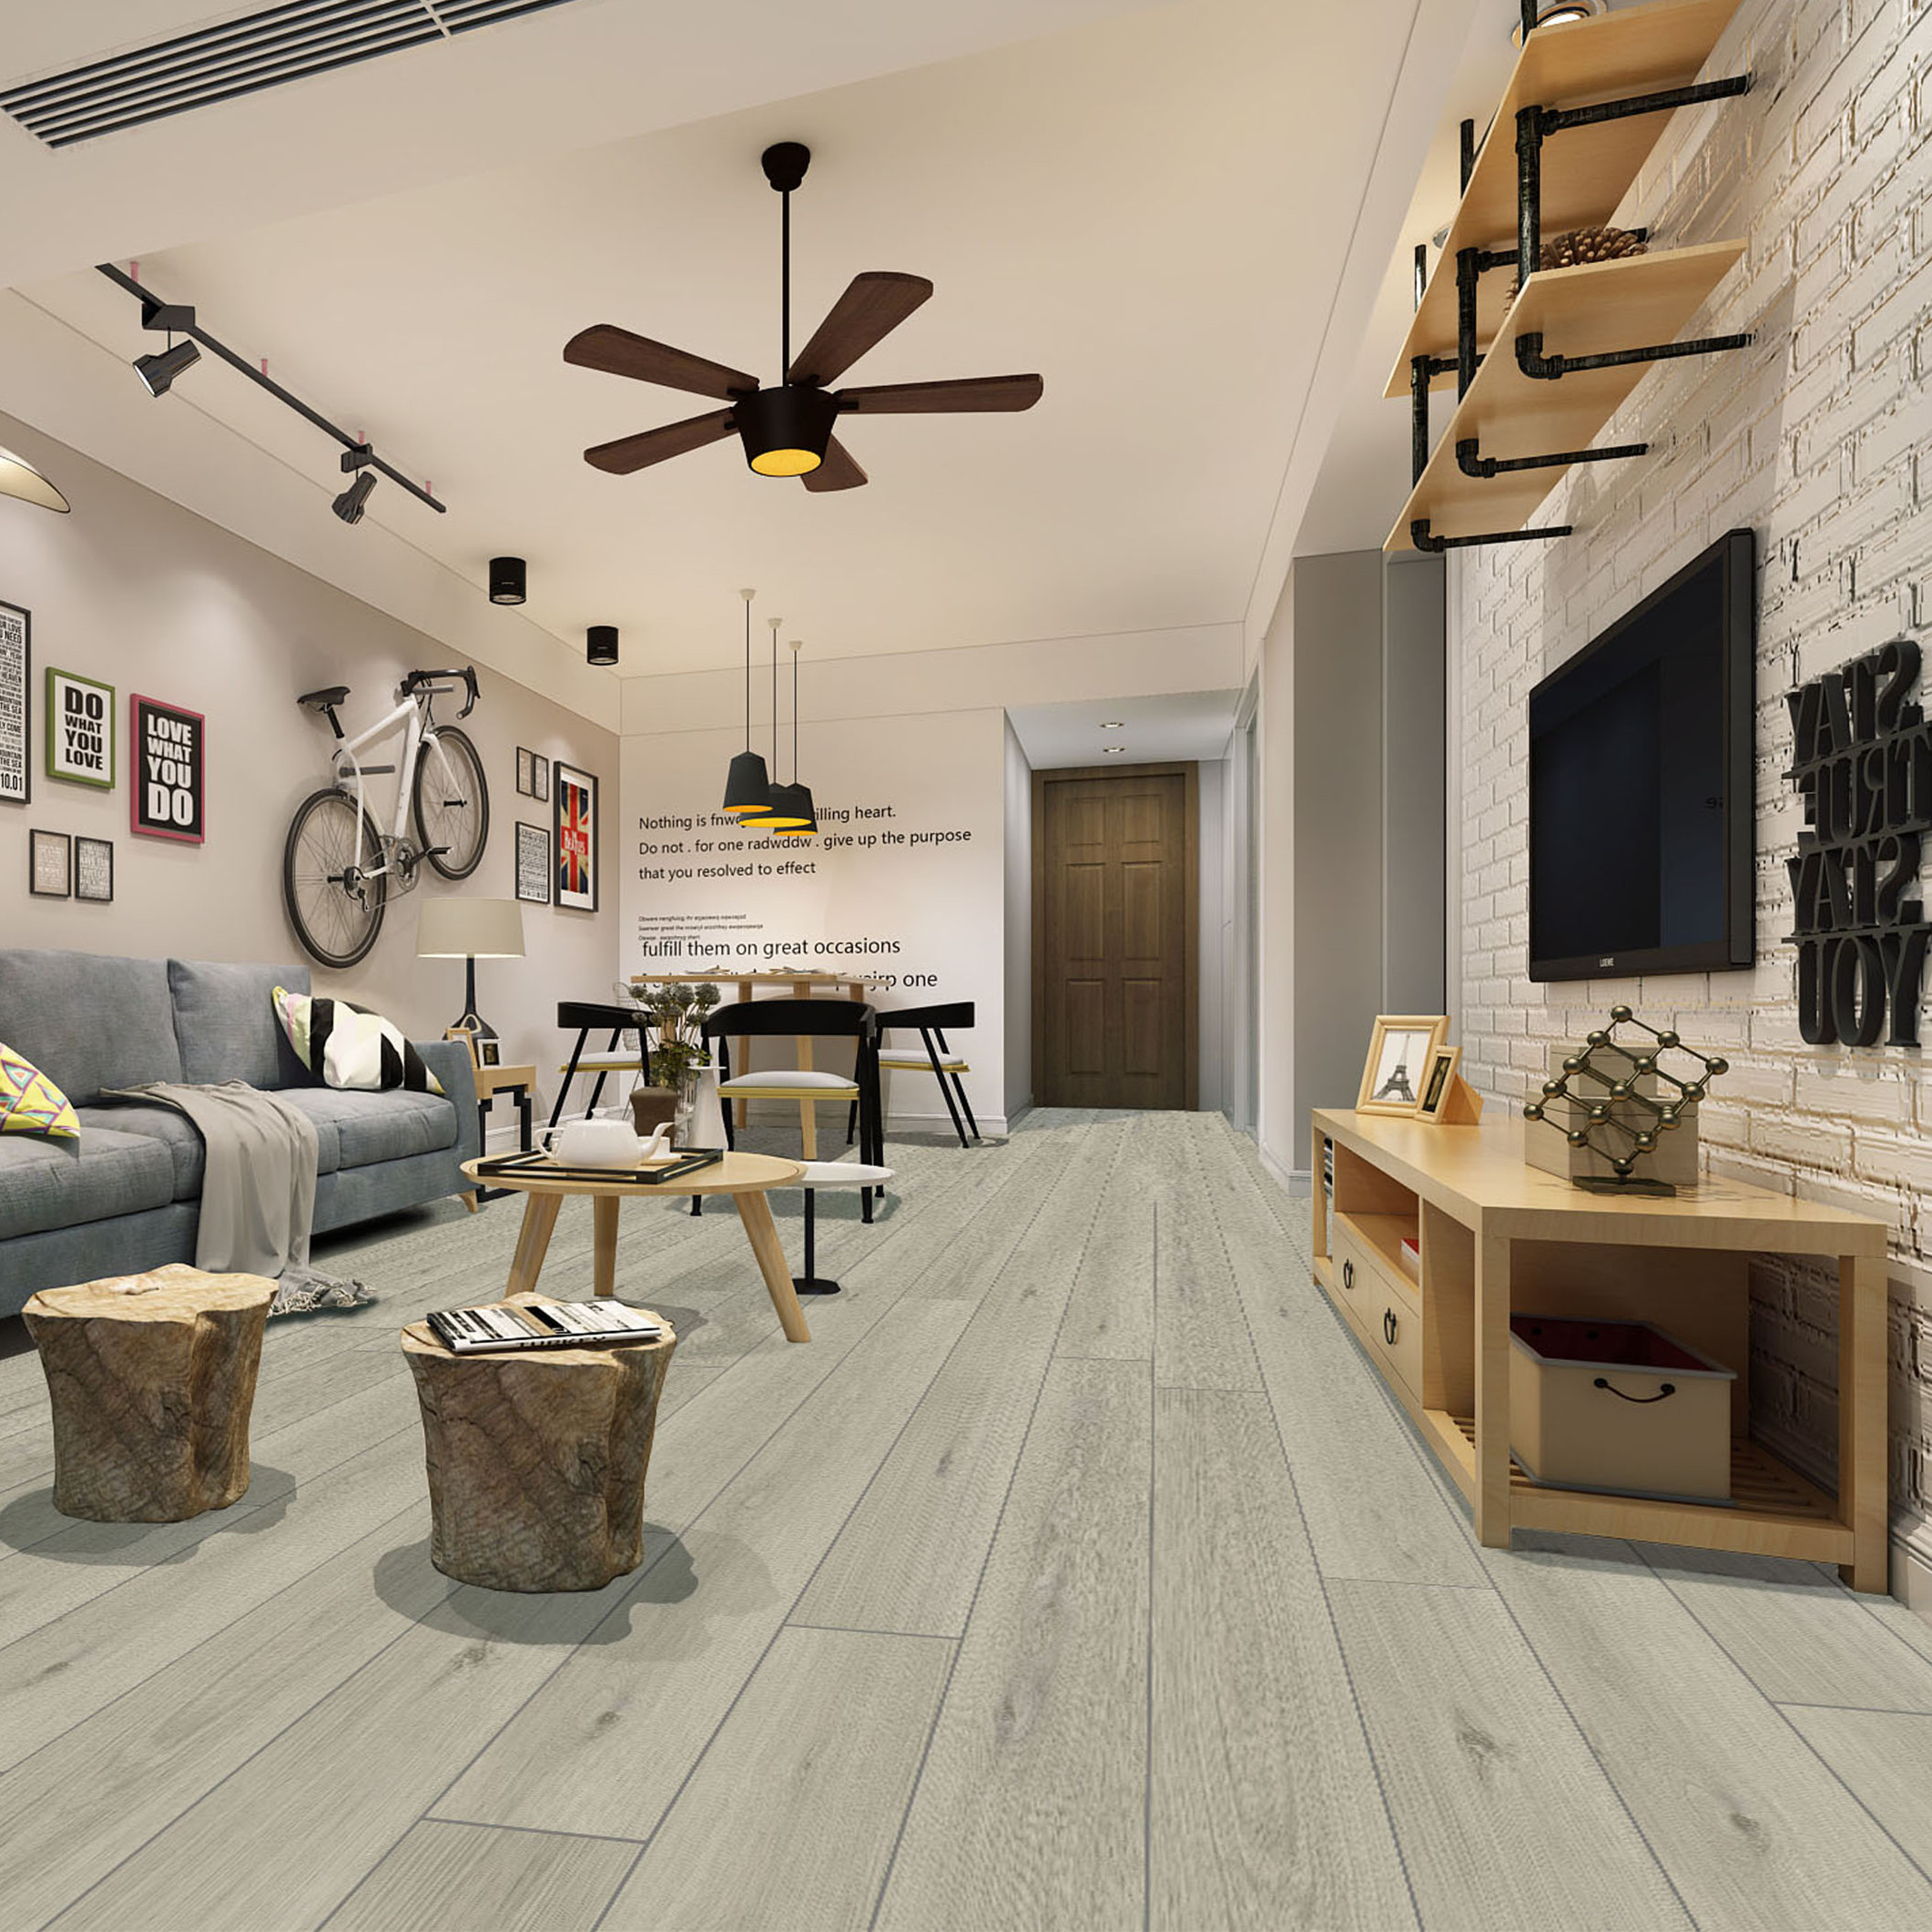 Personlized Products Timber Floorboards -
 Kangton LVT PVC Flooring Tile /lvt pvc flooring /pvc flooring – Kangton